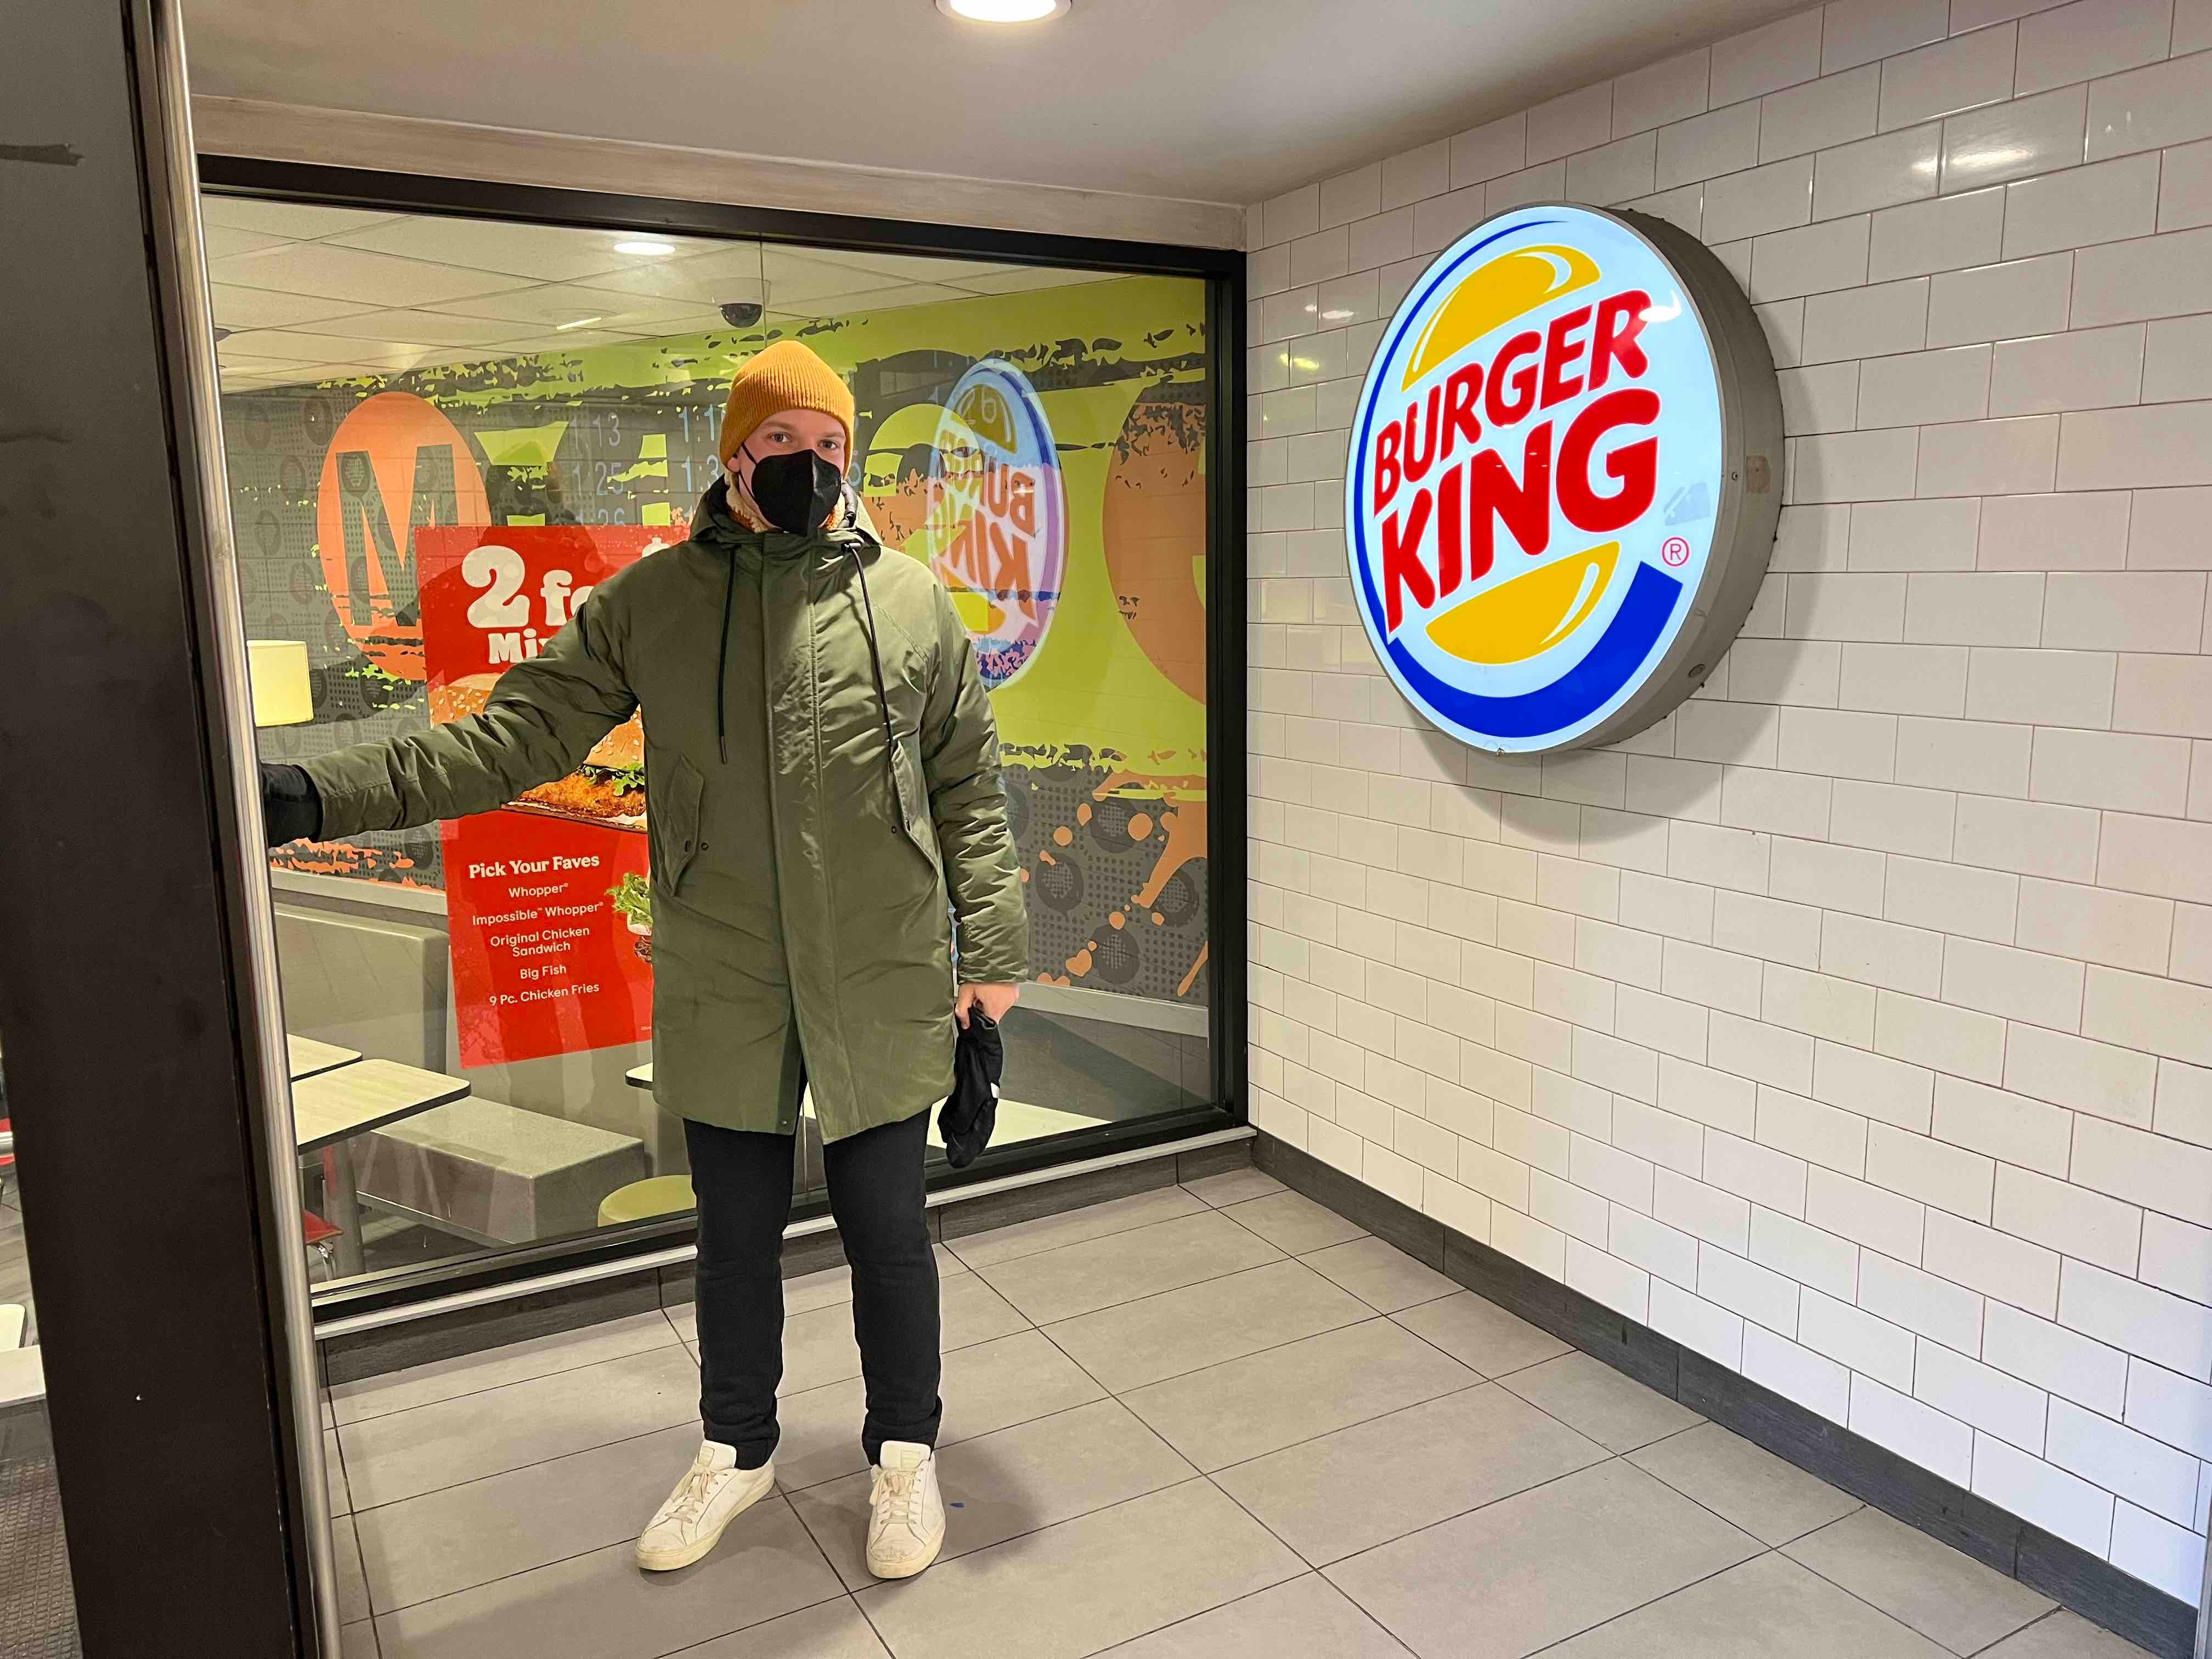 A man in winter clothing stands in front of a Burger King entrance inside of a subway station.